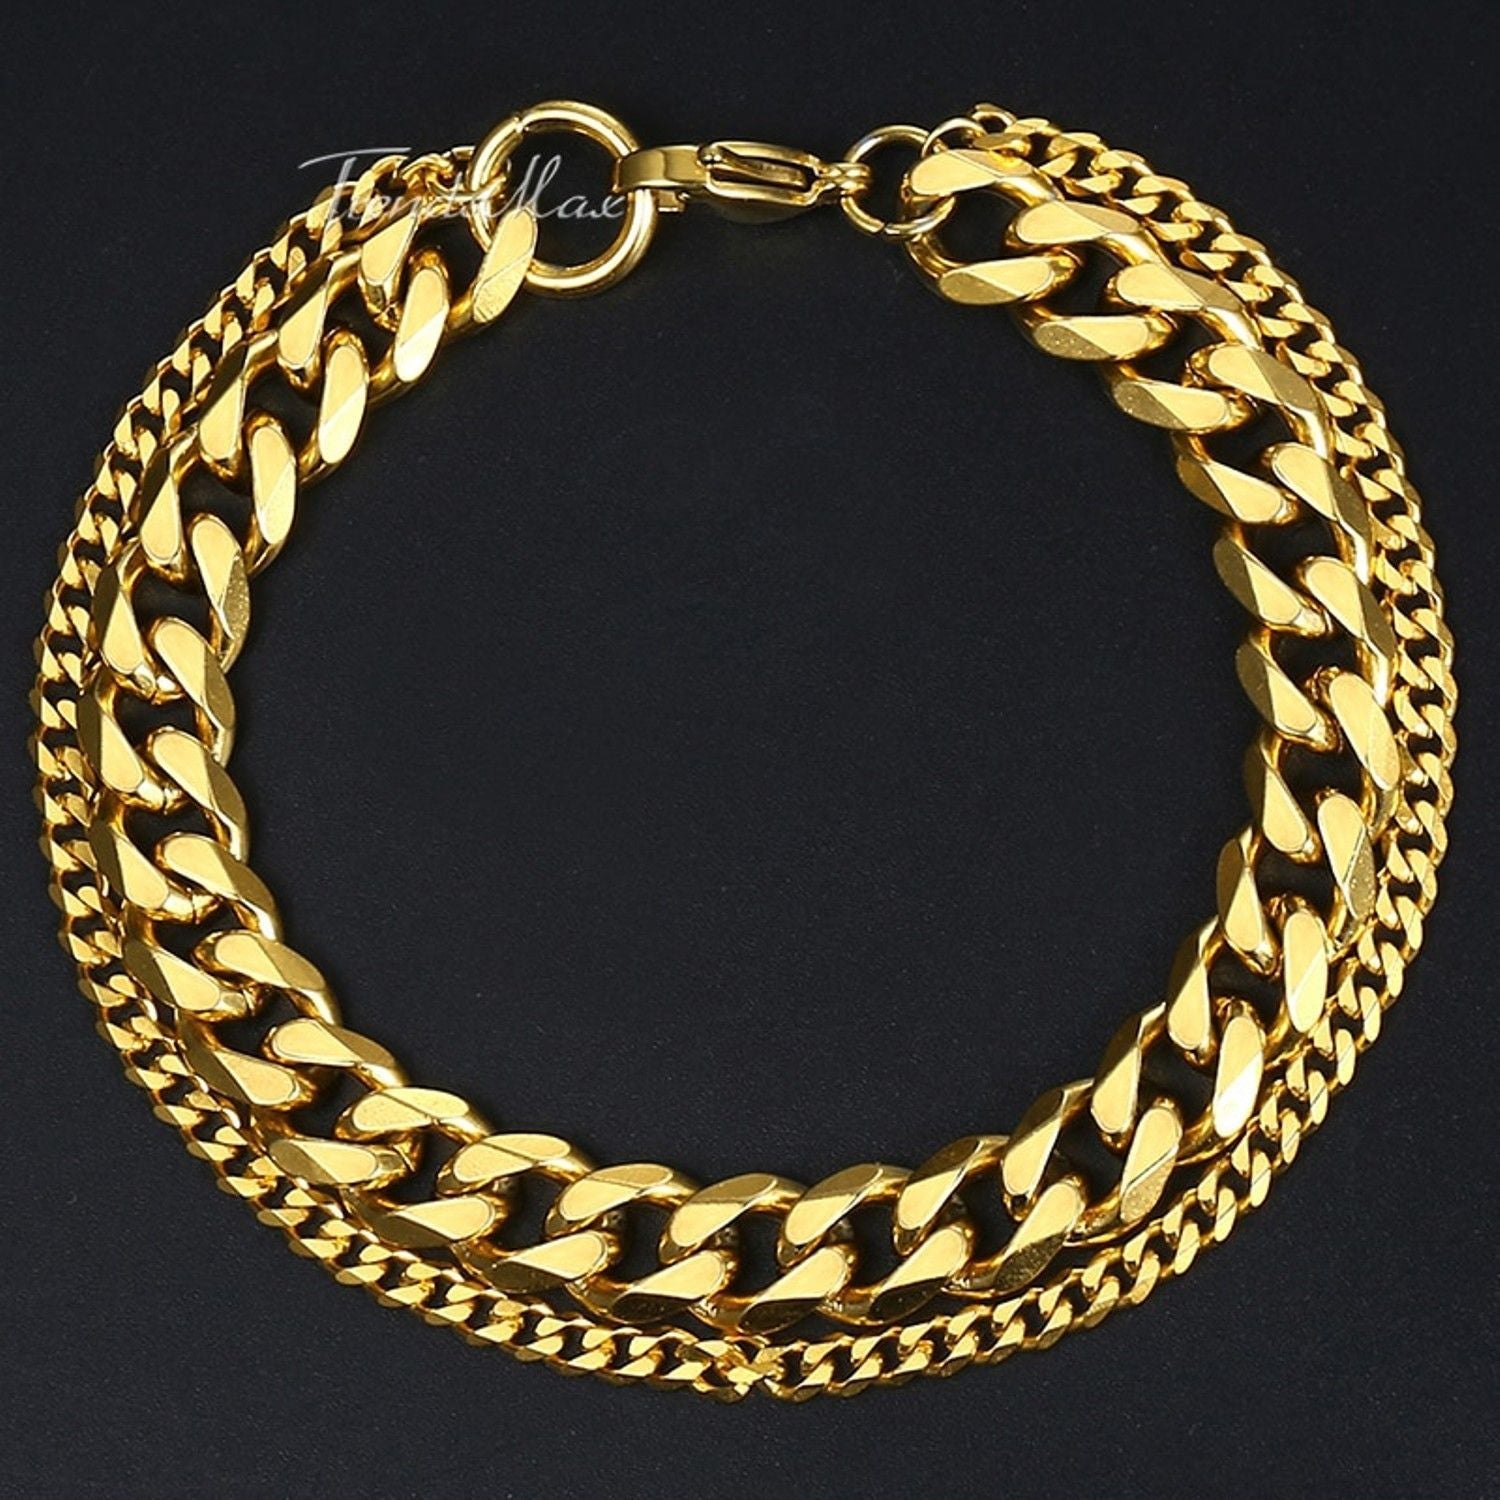 Layered Wrist Wrap Gold Stainless Steel Curb Chain Bracelet